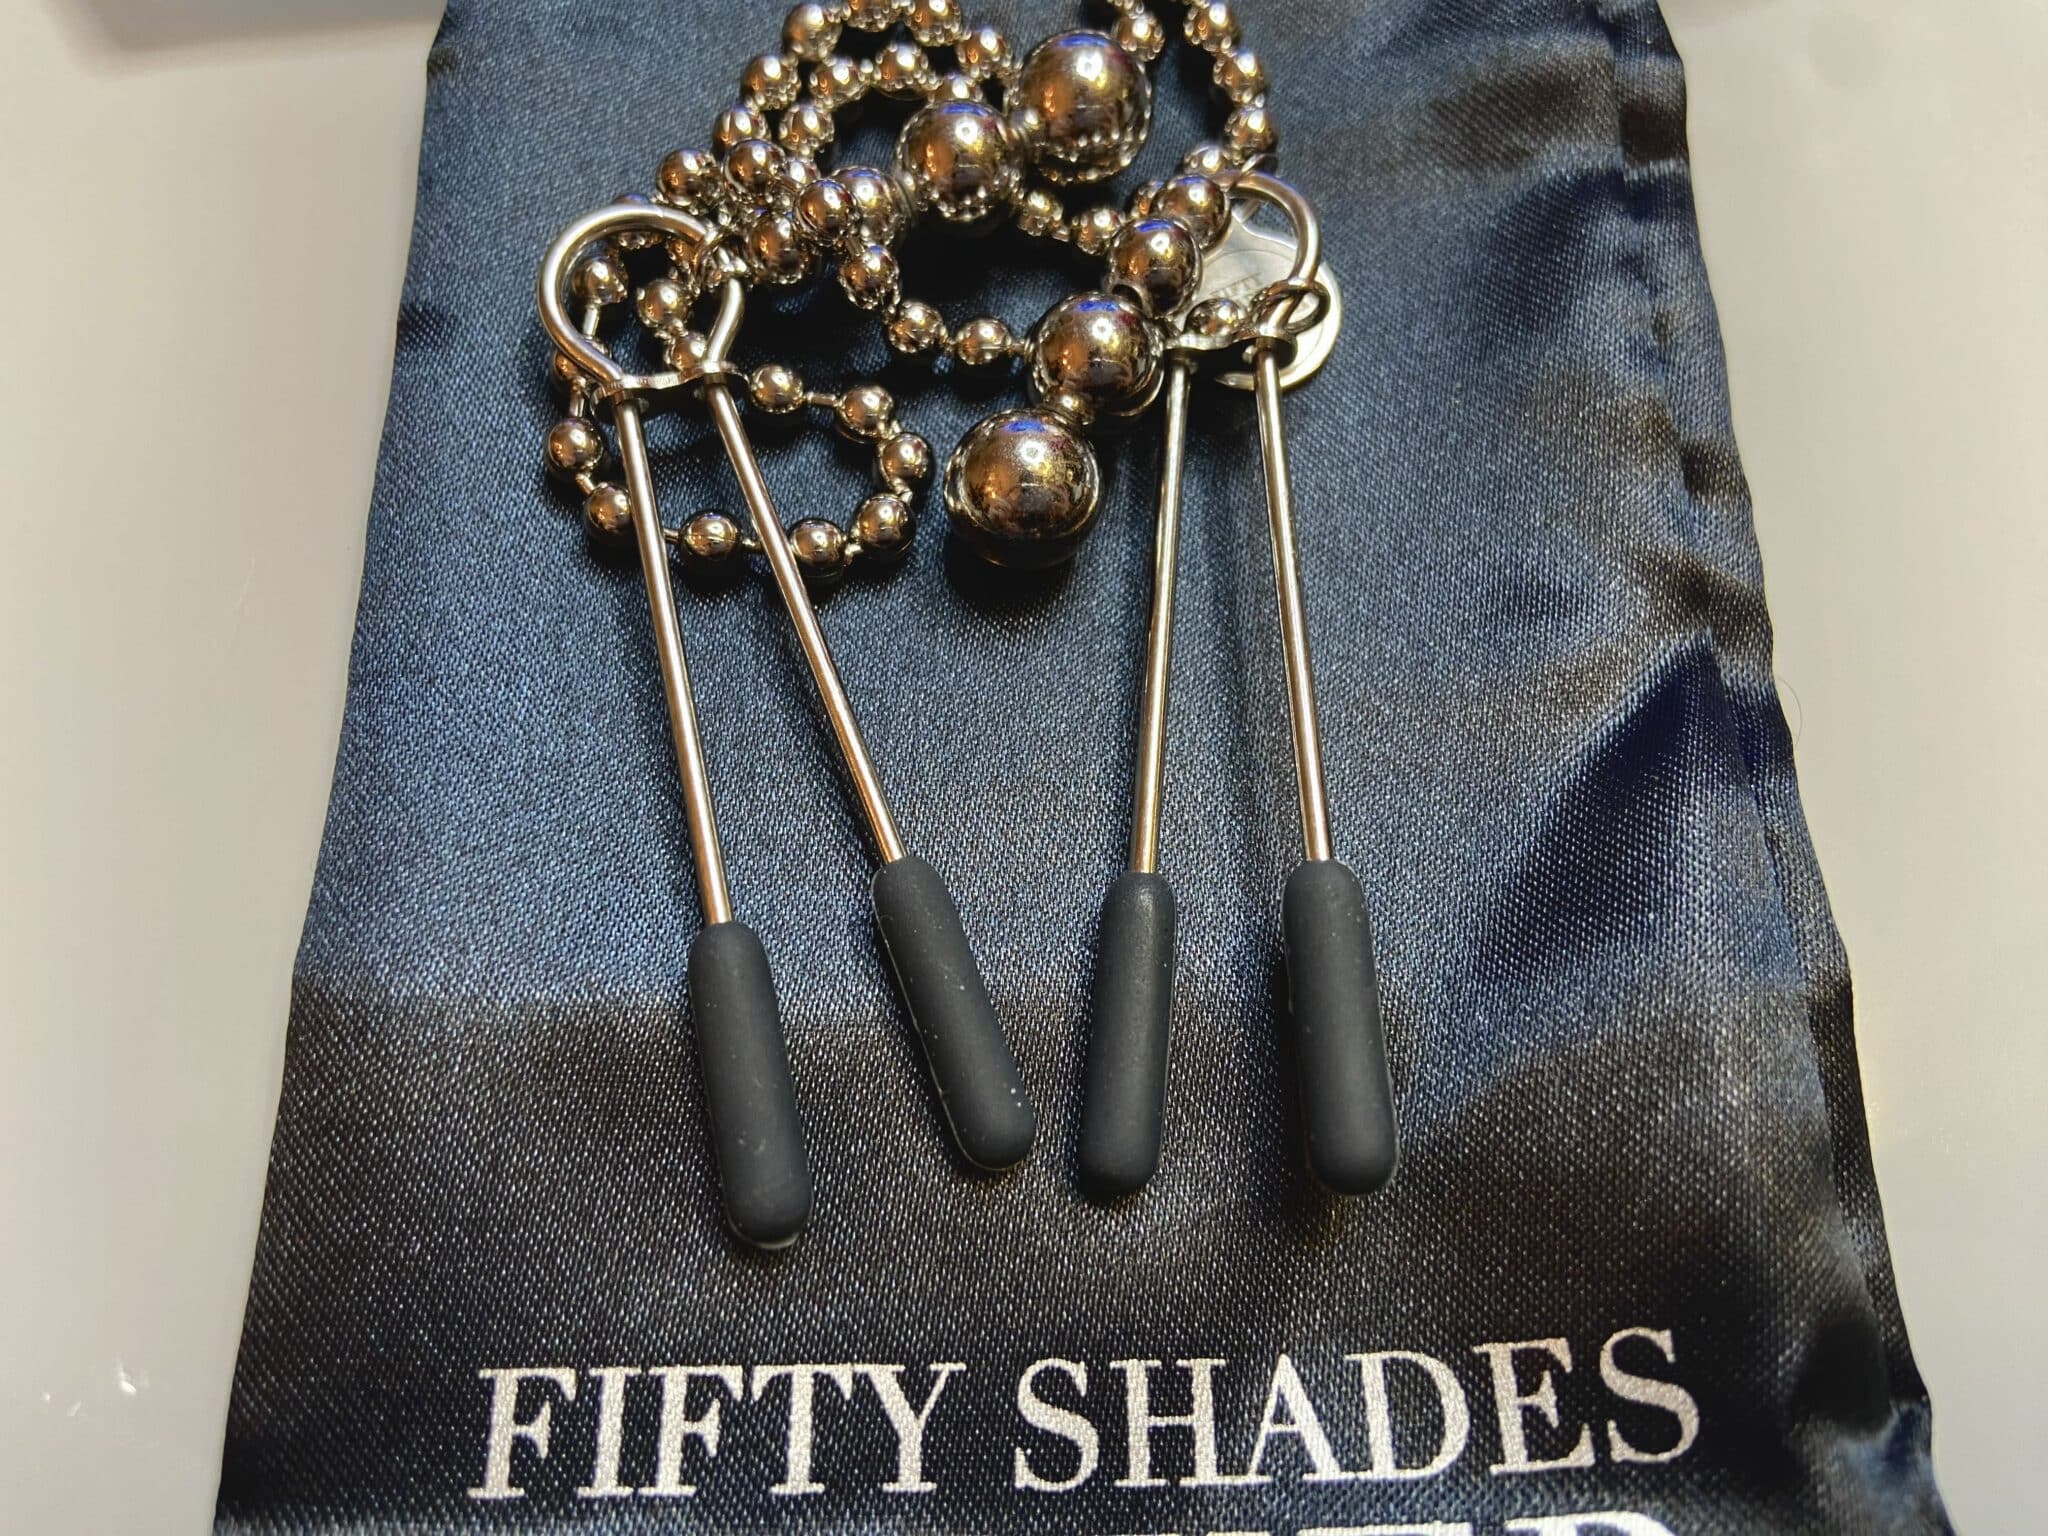 Fifty Shades Darker At My Mercy Chained Nipple Clamps. Slide 5